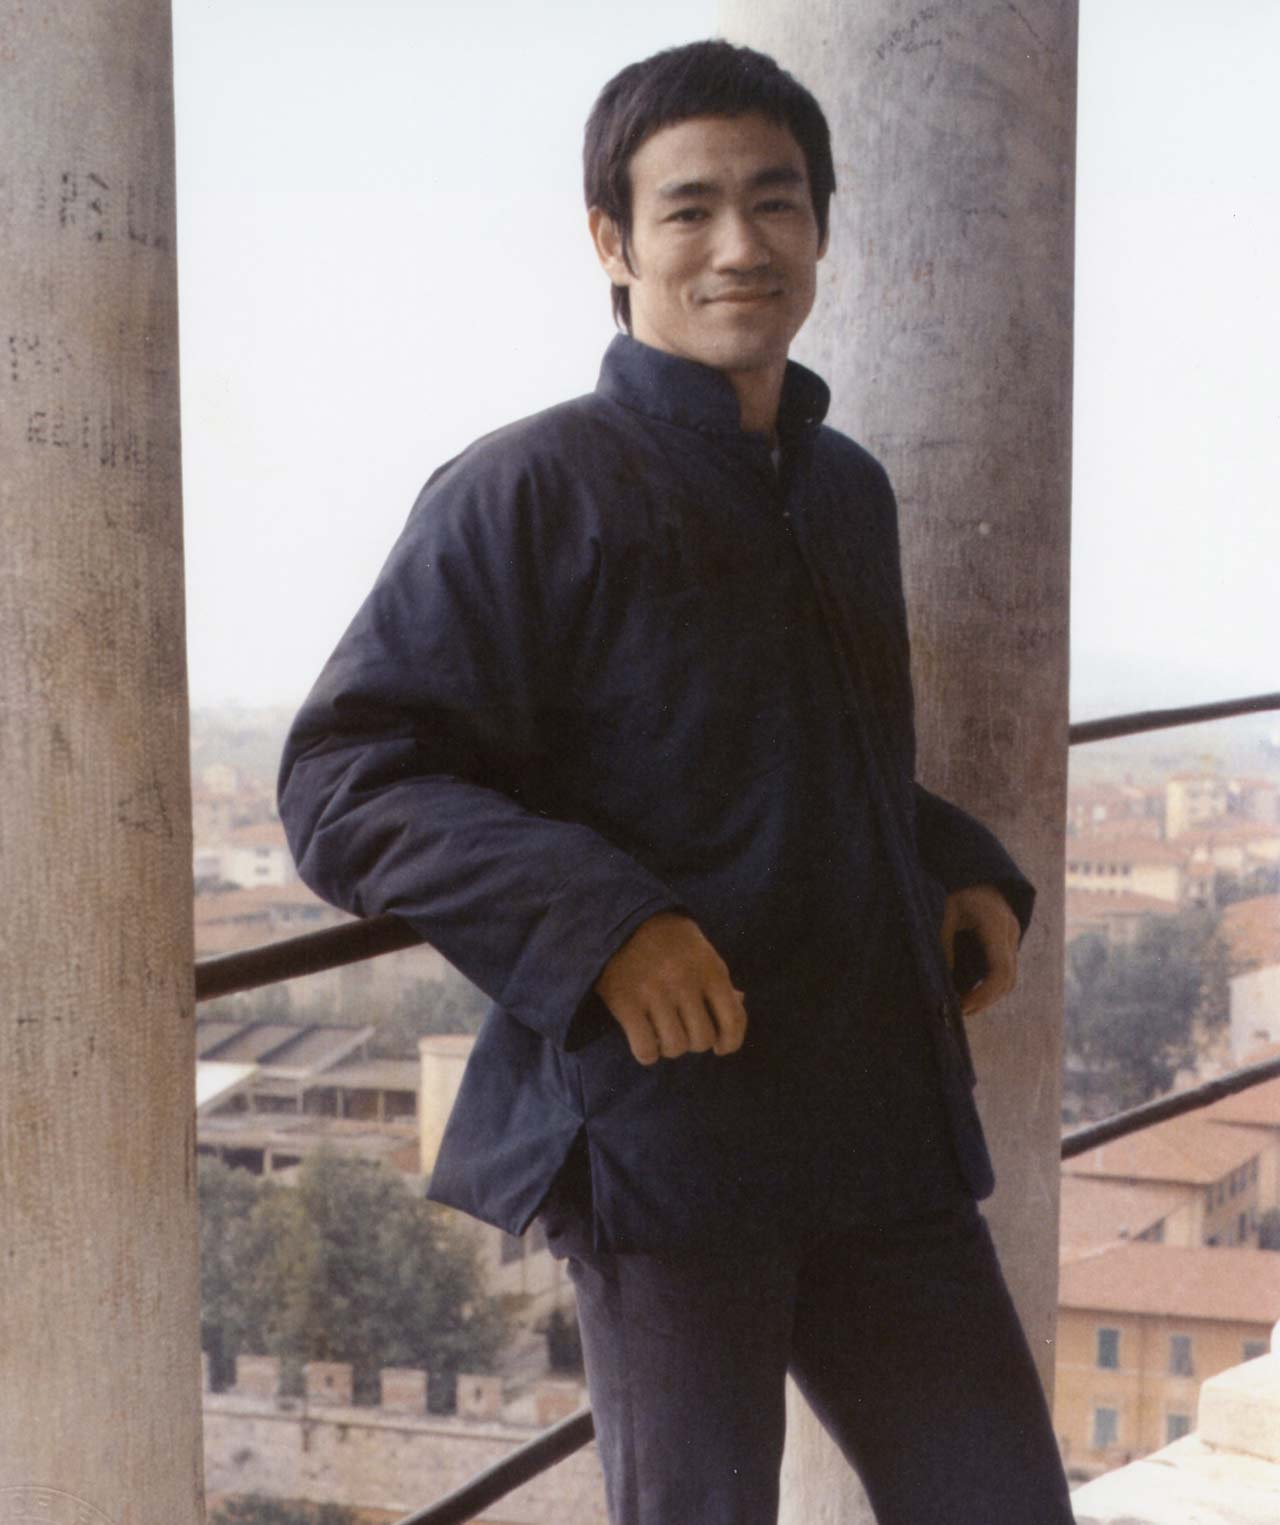 Color photo of martial artist, philosophist, actor, writer, director and producer, Bruce Lee Jun Fan in Rome